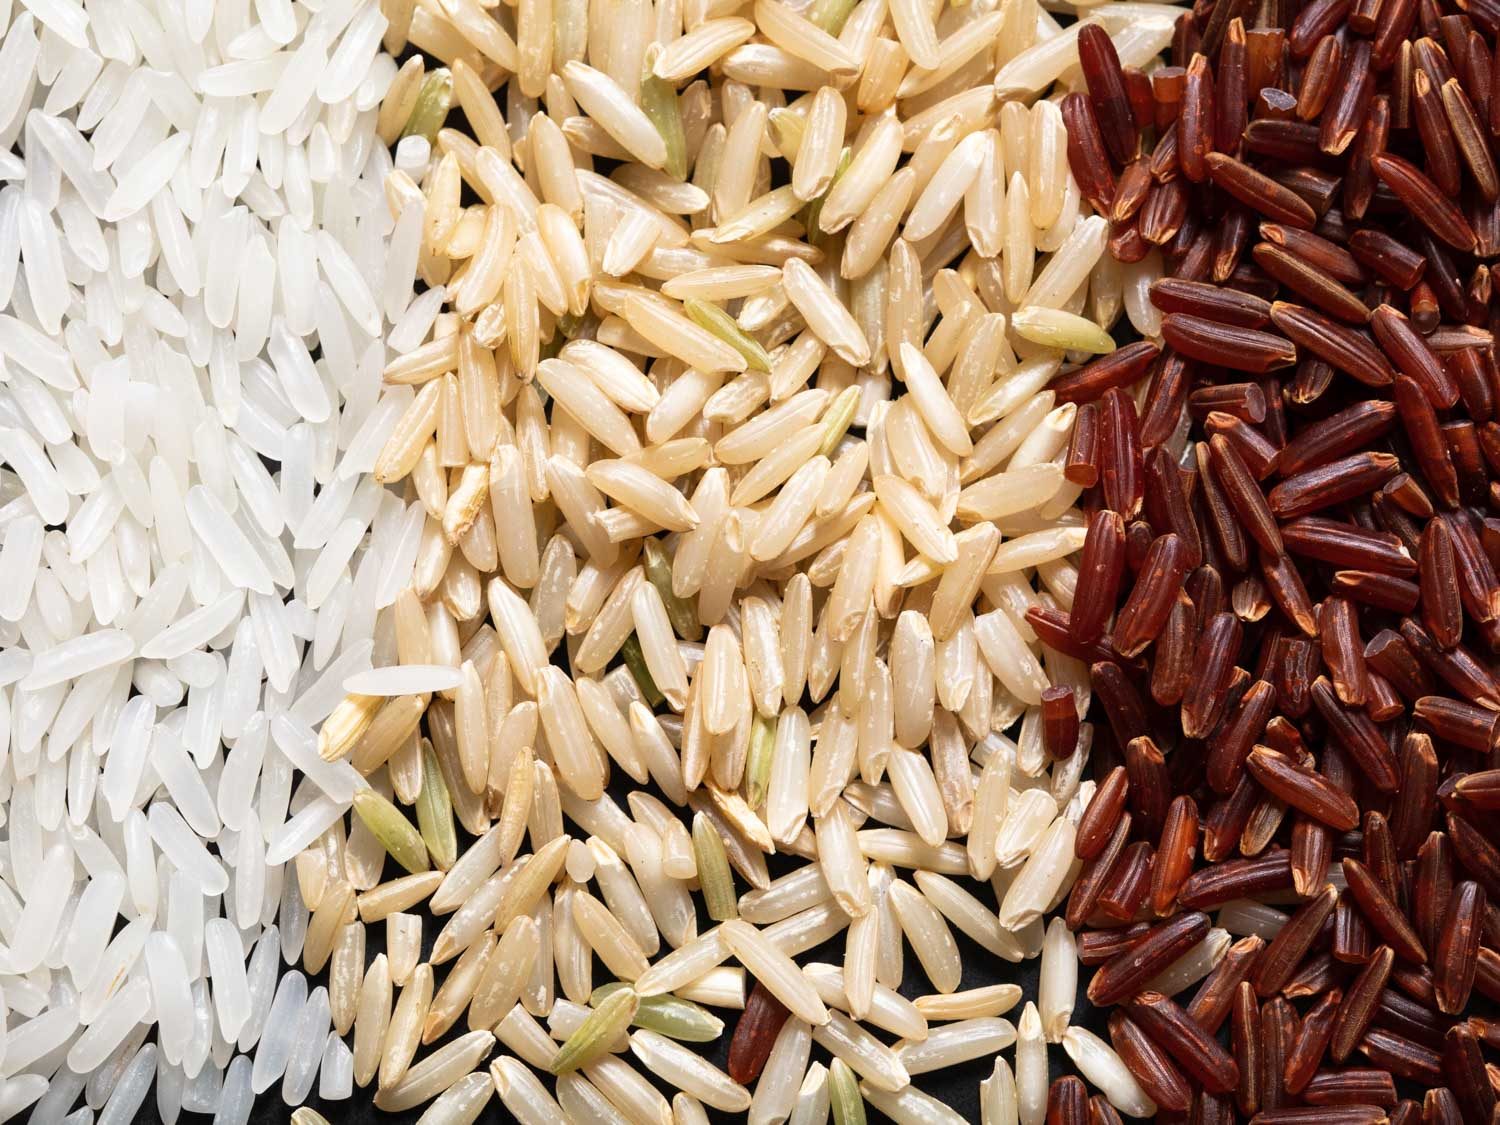 polished, brown, and red jasmine rice comparison shot